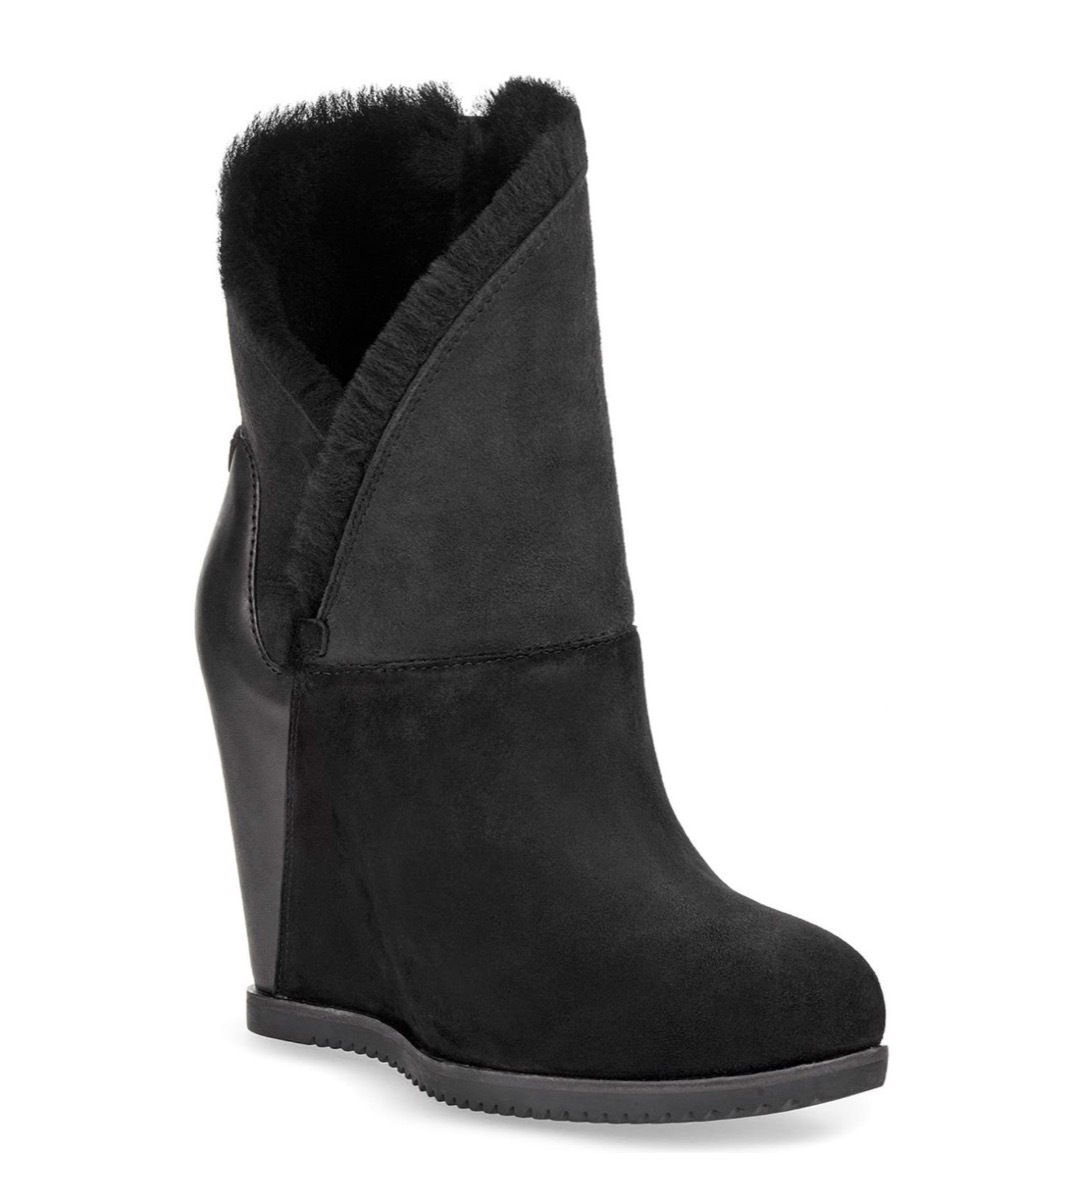 black boots with shearling lining